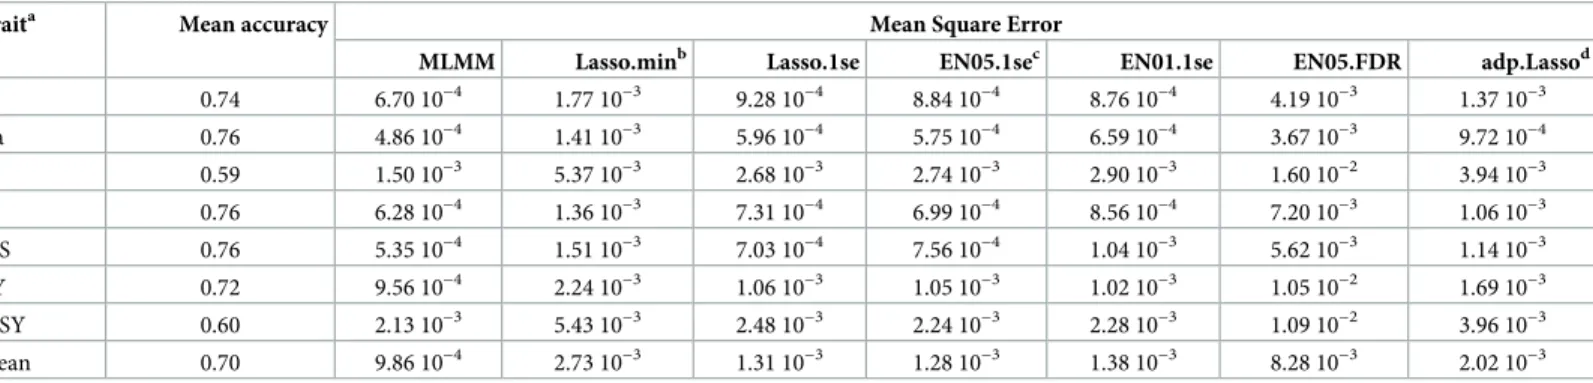 Table 1. The accuracy and MSE of EthAcc compared to the TS accuracy according to several methods for estimation of causal QTLs on different traits (mean over 100 random test-training sets).